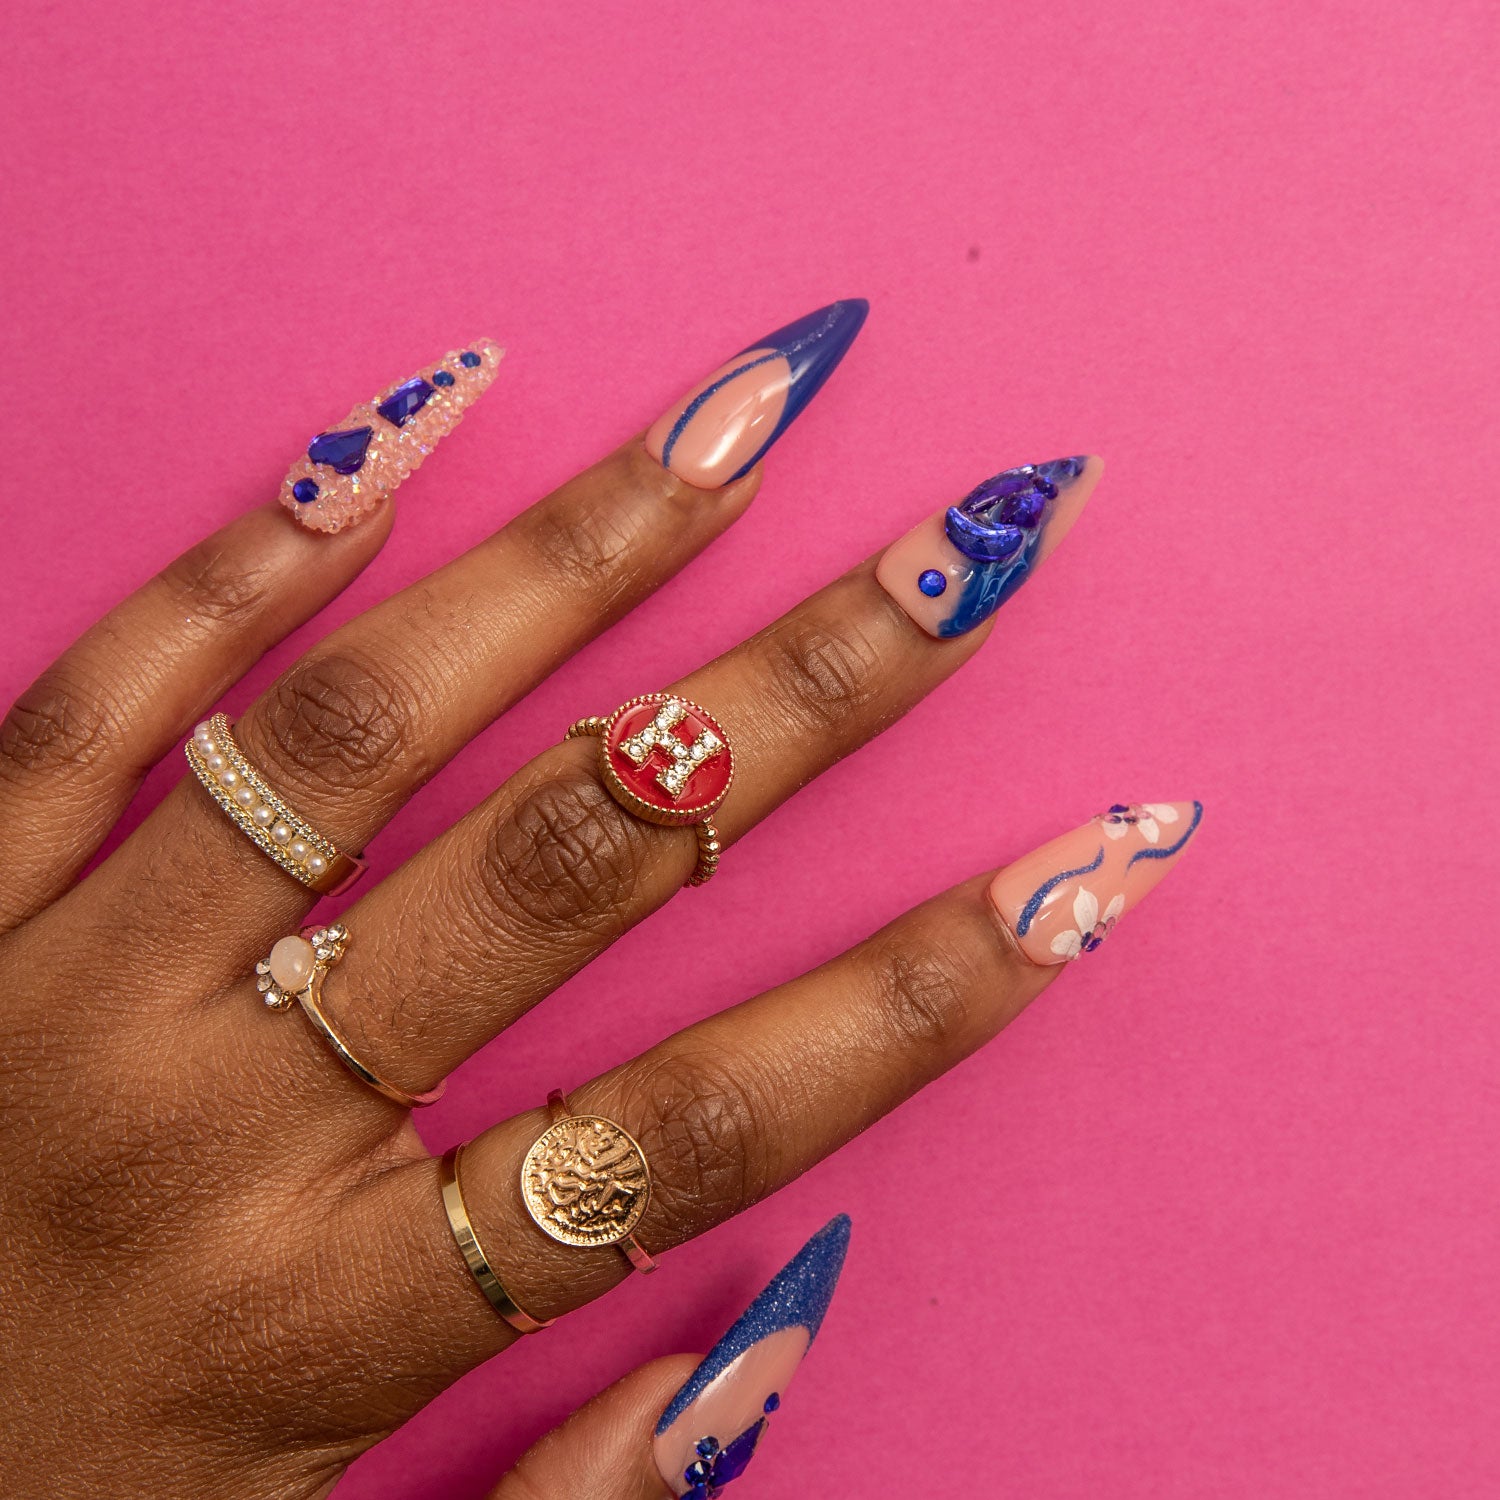 Hand with 'Blue Suede' press-on stiletto nails featuring deep blue French tips, curvy line designs, blue heart-shaped gems, crystal decorations, and adorned with gold and diamond rings against a pink background.